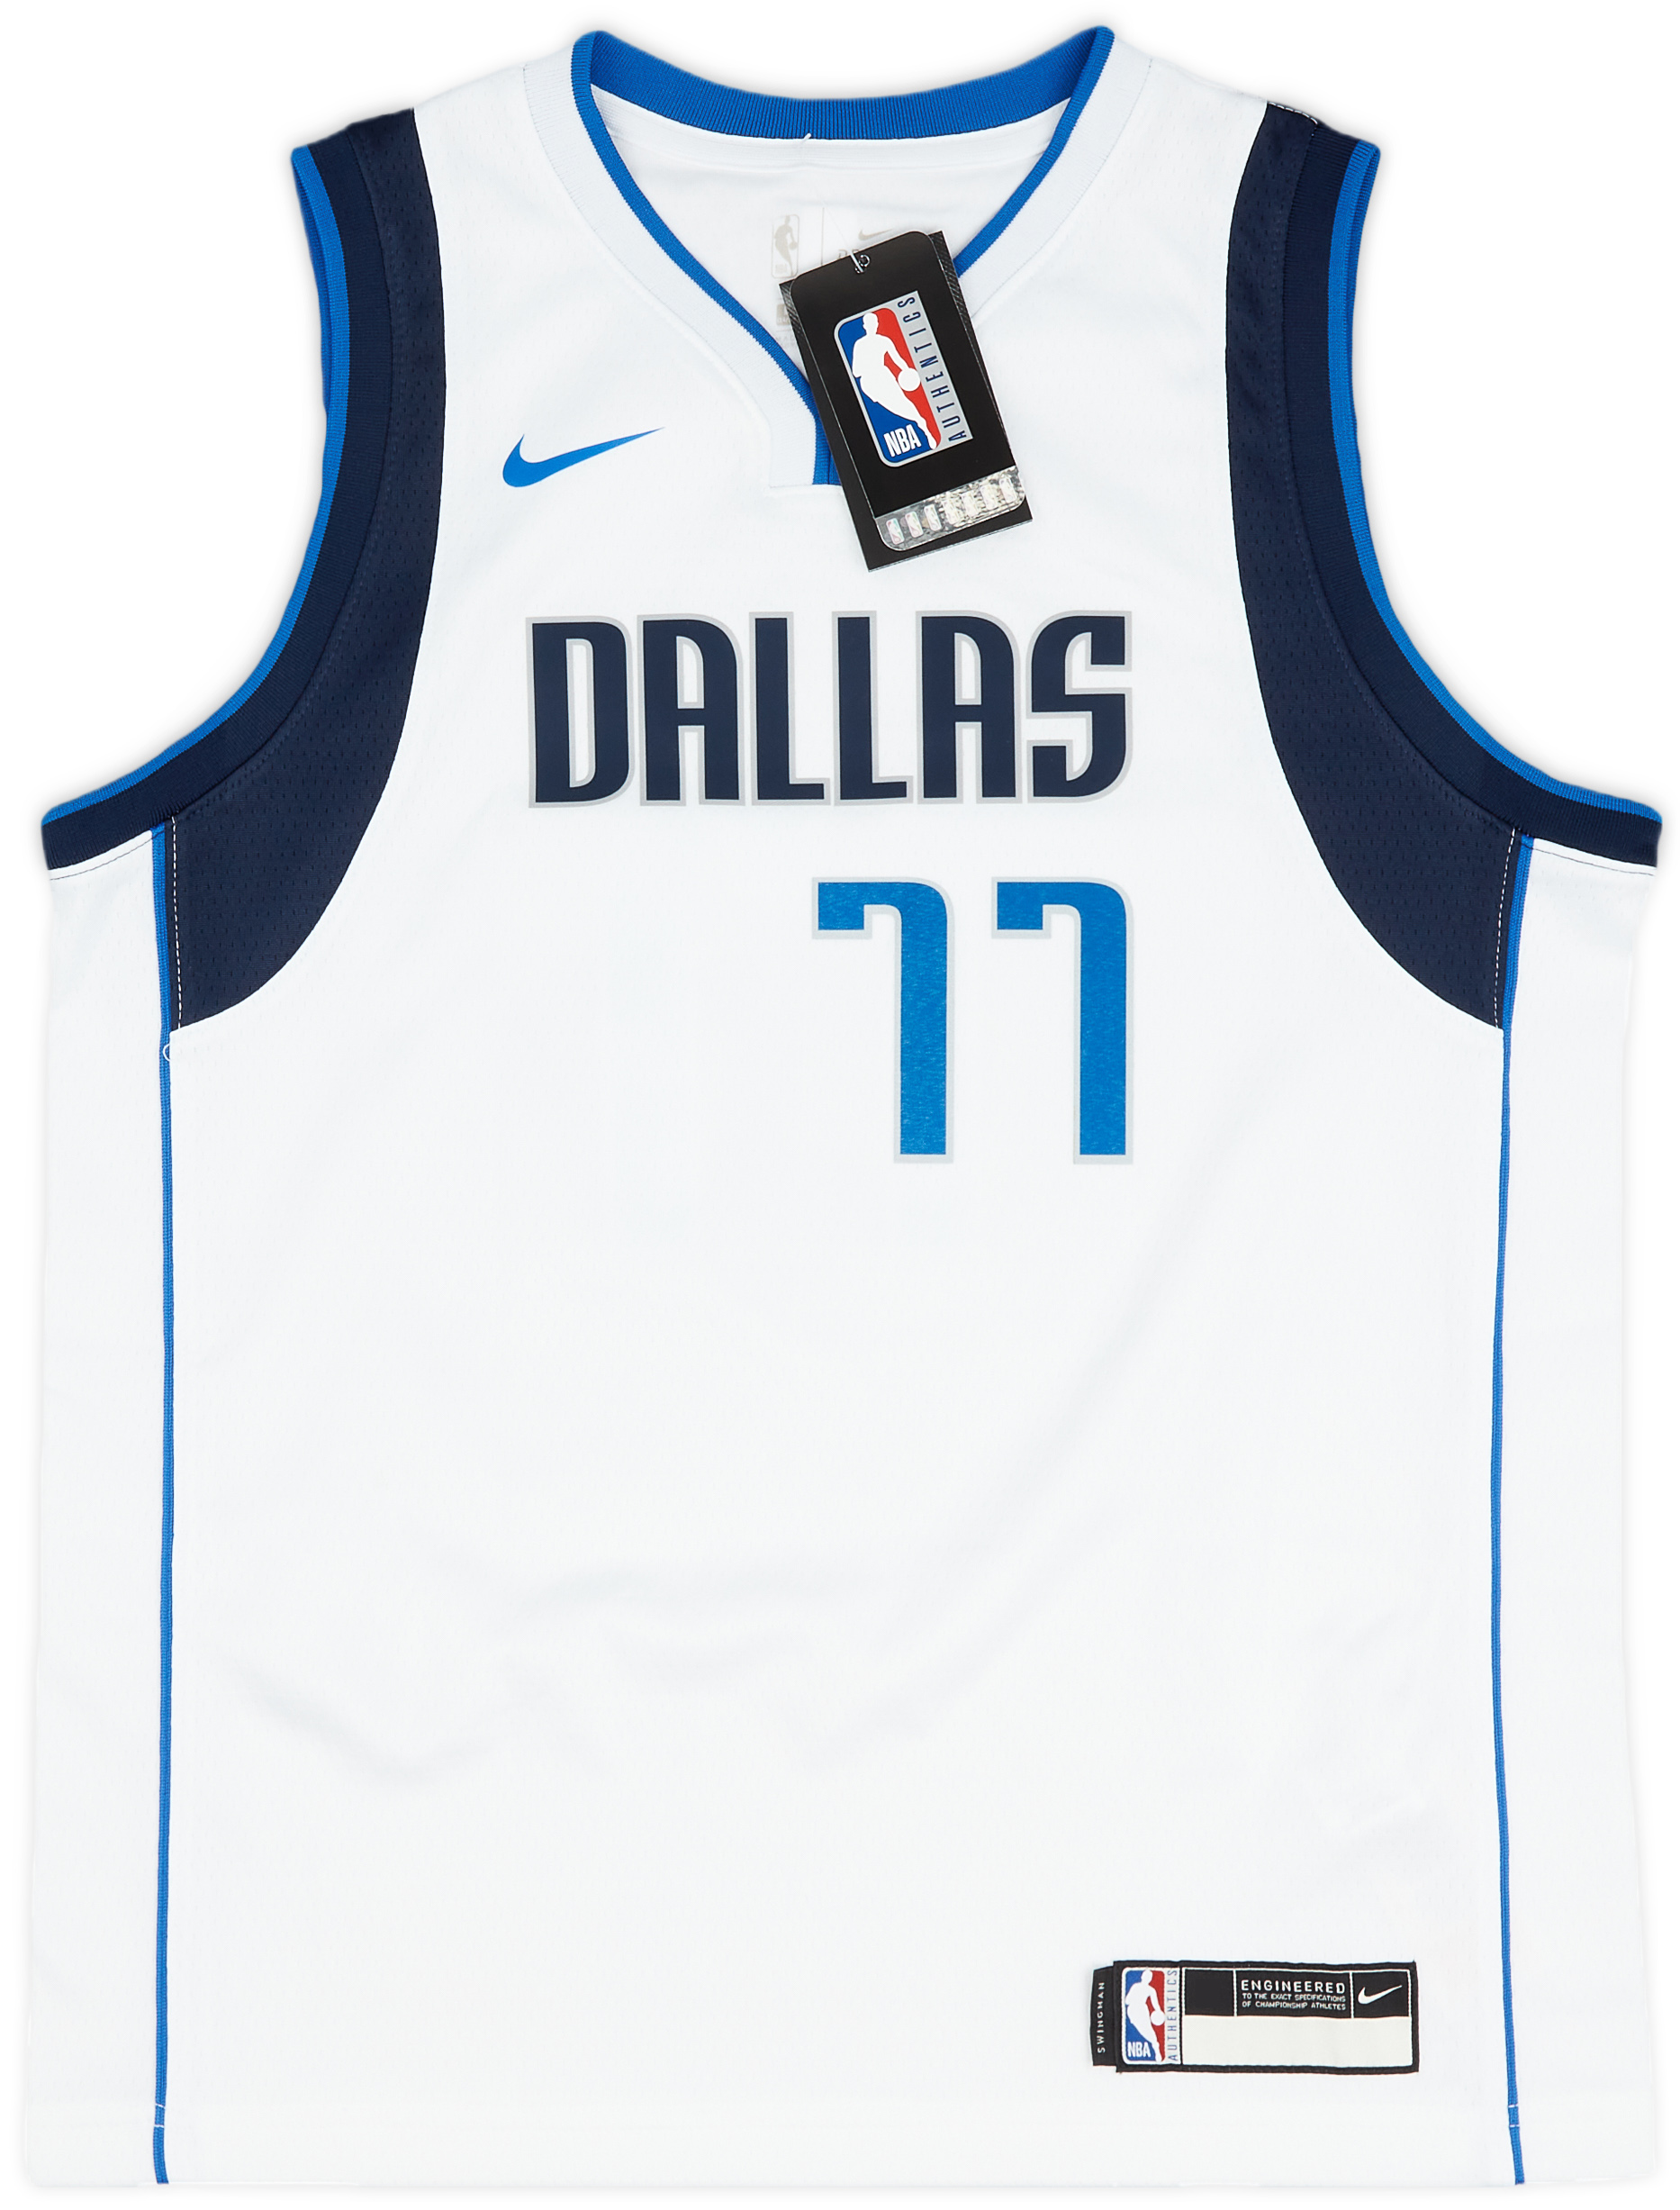 How the Mavericks new City Edition jersey matches up with the rest